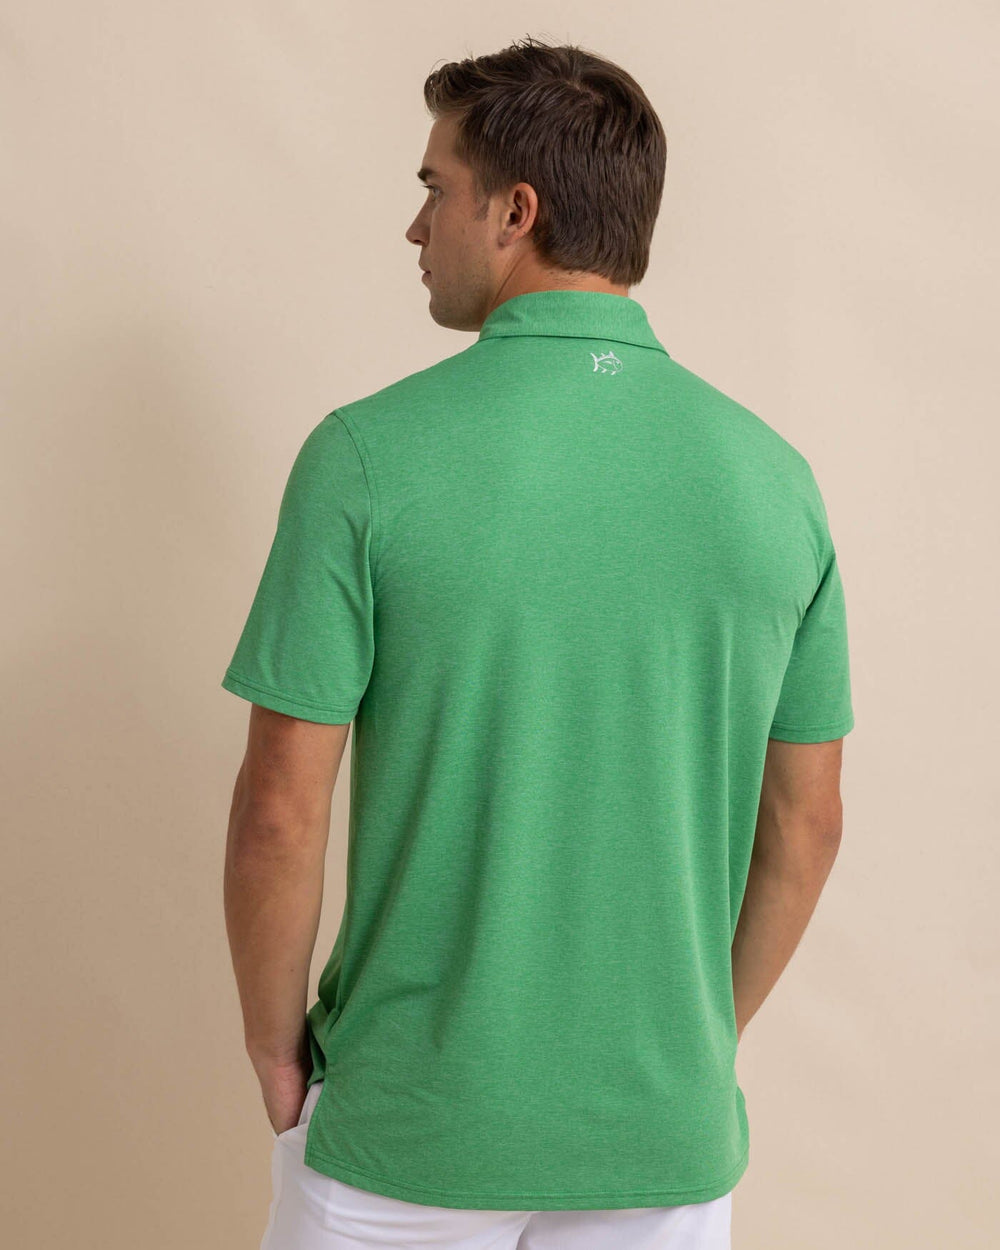 The back view of the Southern Tide brrr-eeze-heather-performance-polo-shirt by Southern Tide - Heather Kelly Green